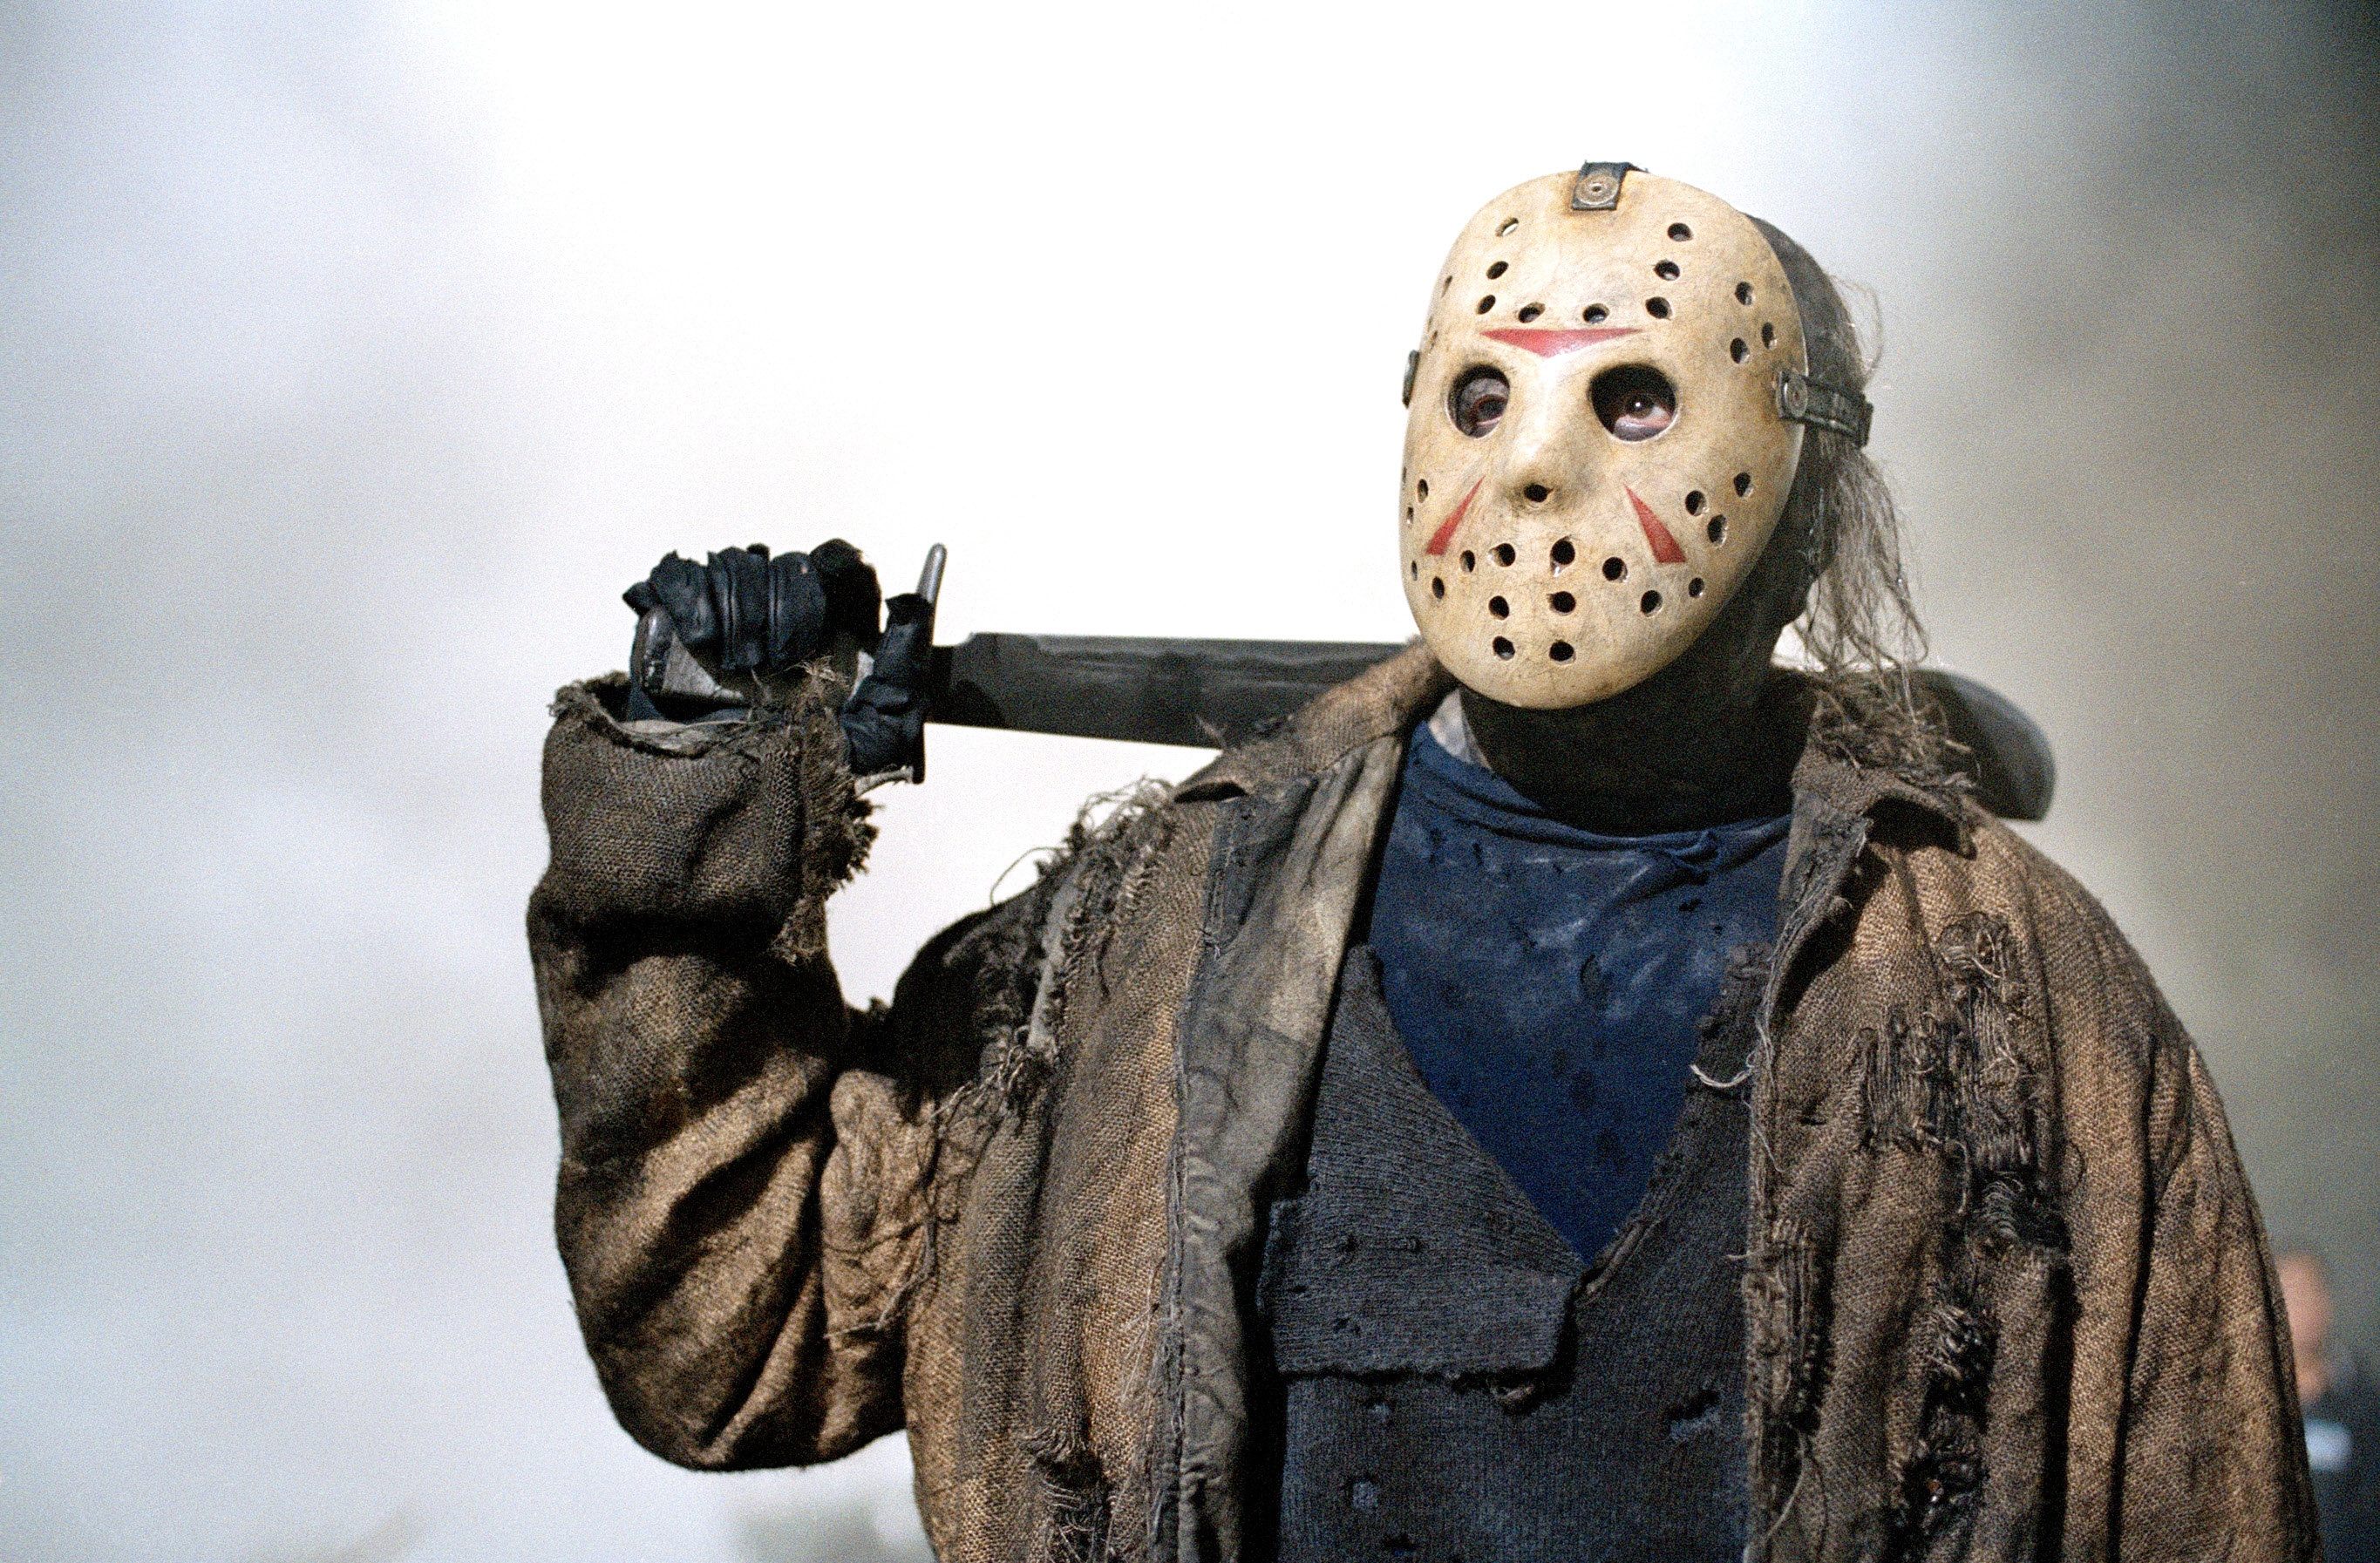 Friday the 13th Movies Ranked from Worst to Best